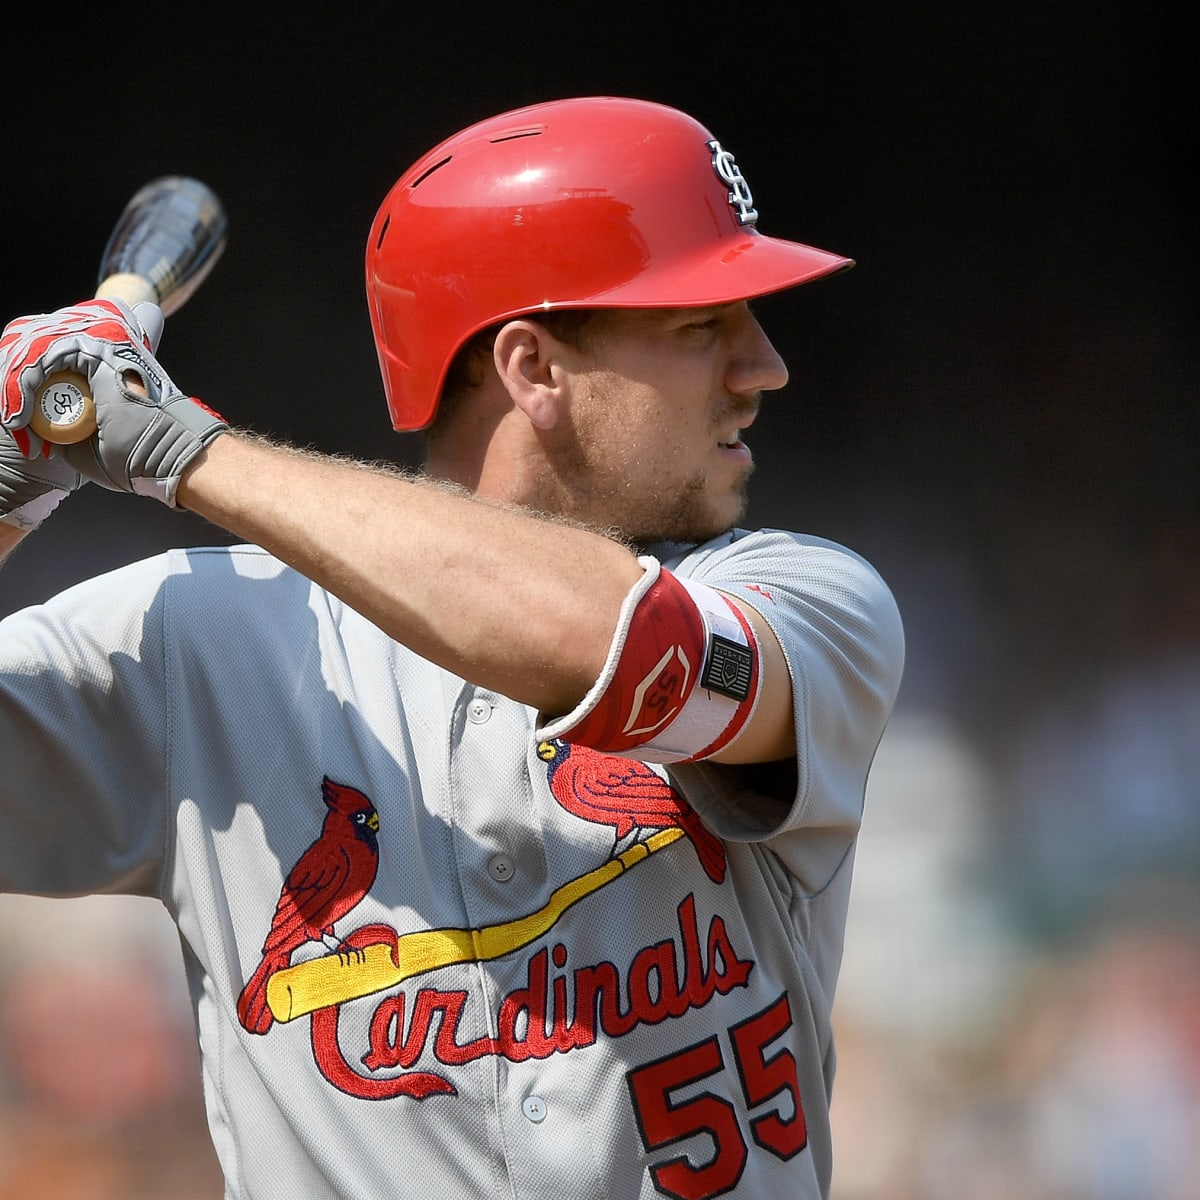 Cardinals' Stephen Piscotty could play again in regular season, team says